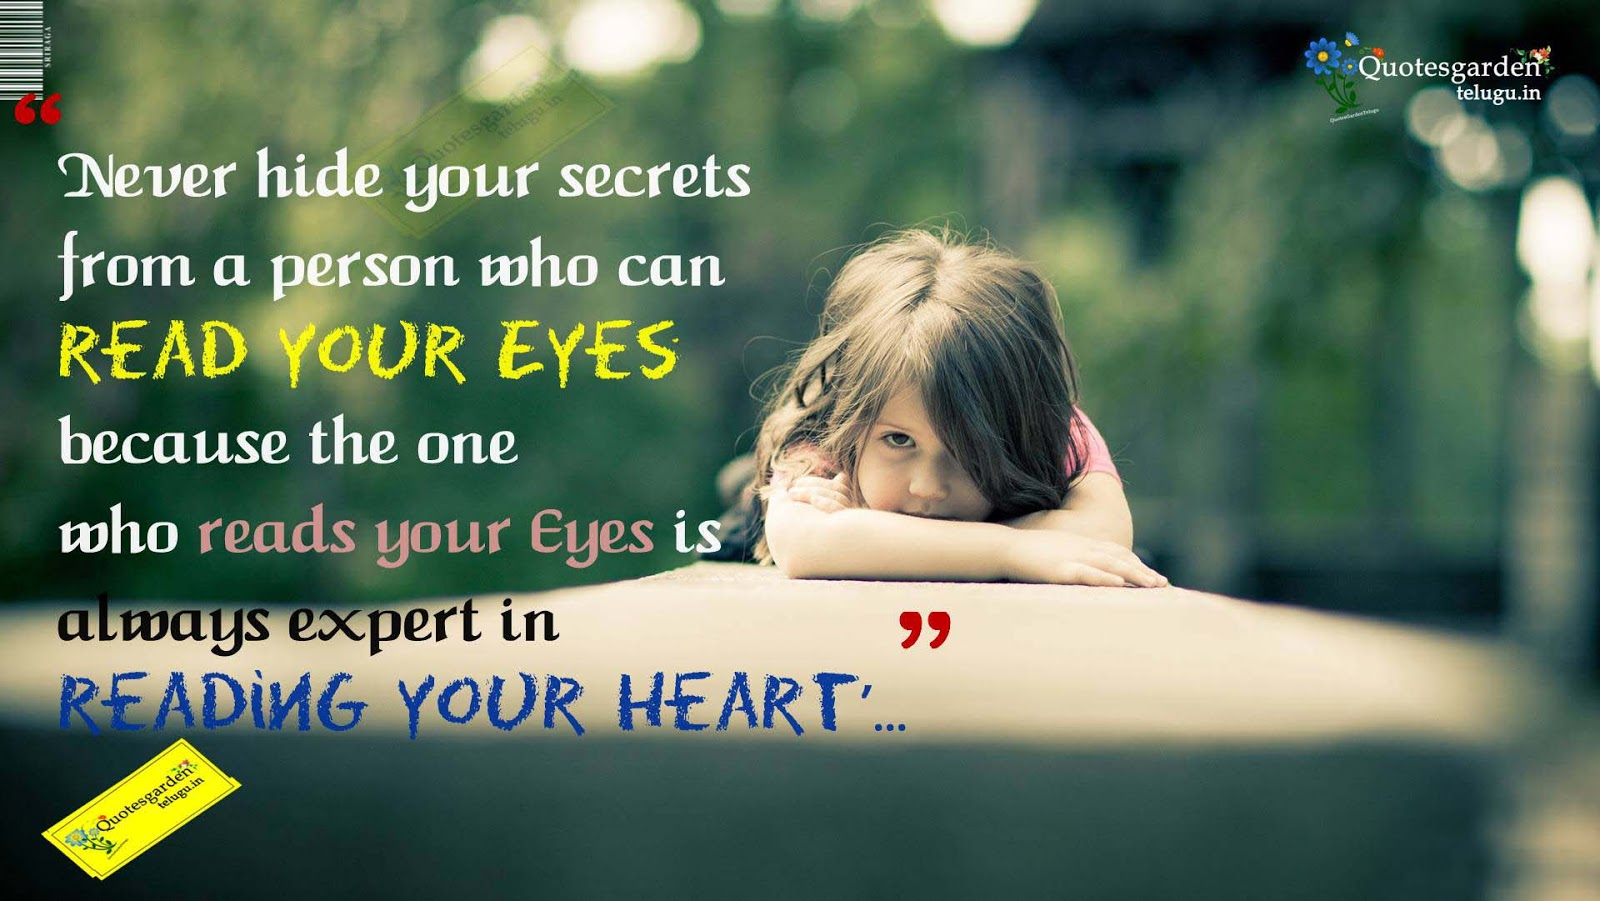 Love Heart Touching Friendship Quotes - HD Wallpaper 